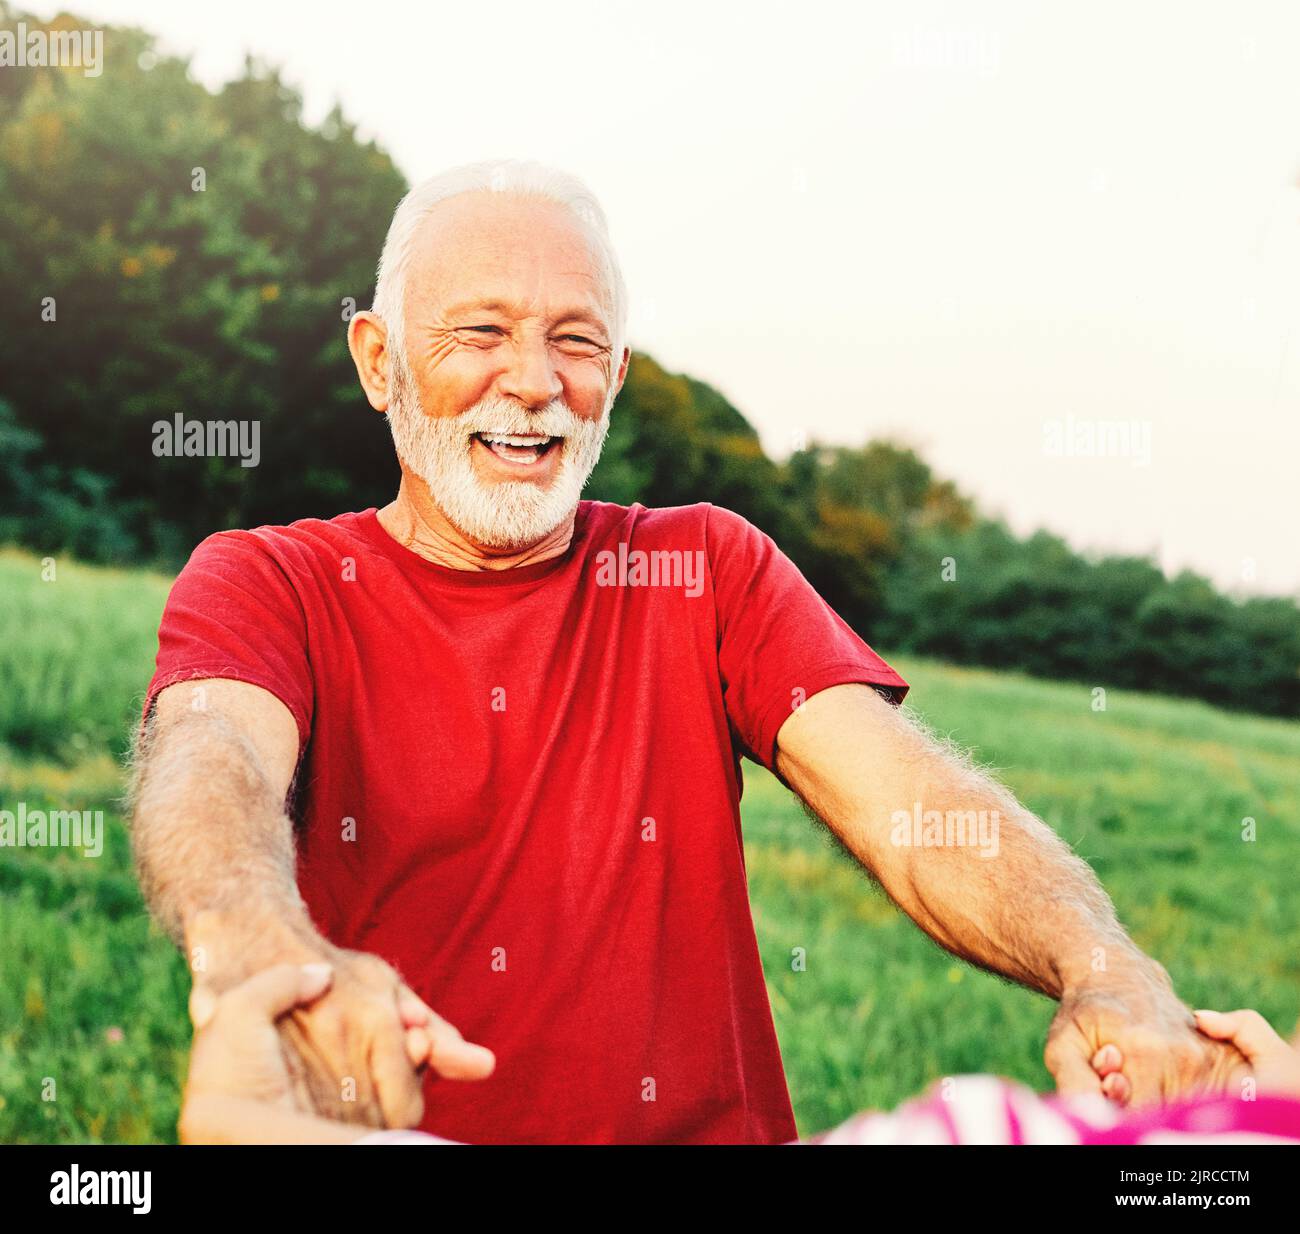 woman man outdoor senior couple happy lifestyle retirement together smiling love dancing fun playing game active vitality nature mature Stock Photo